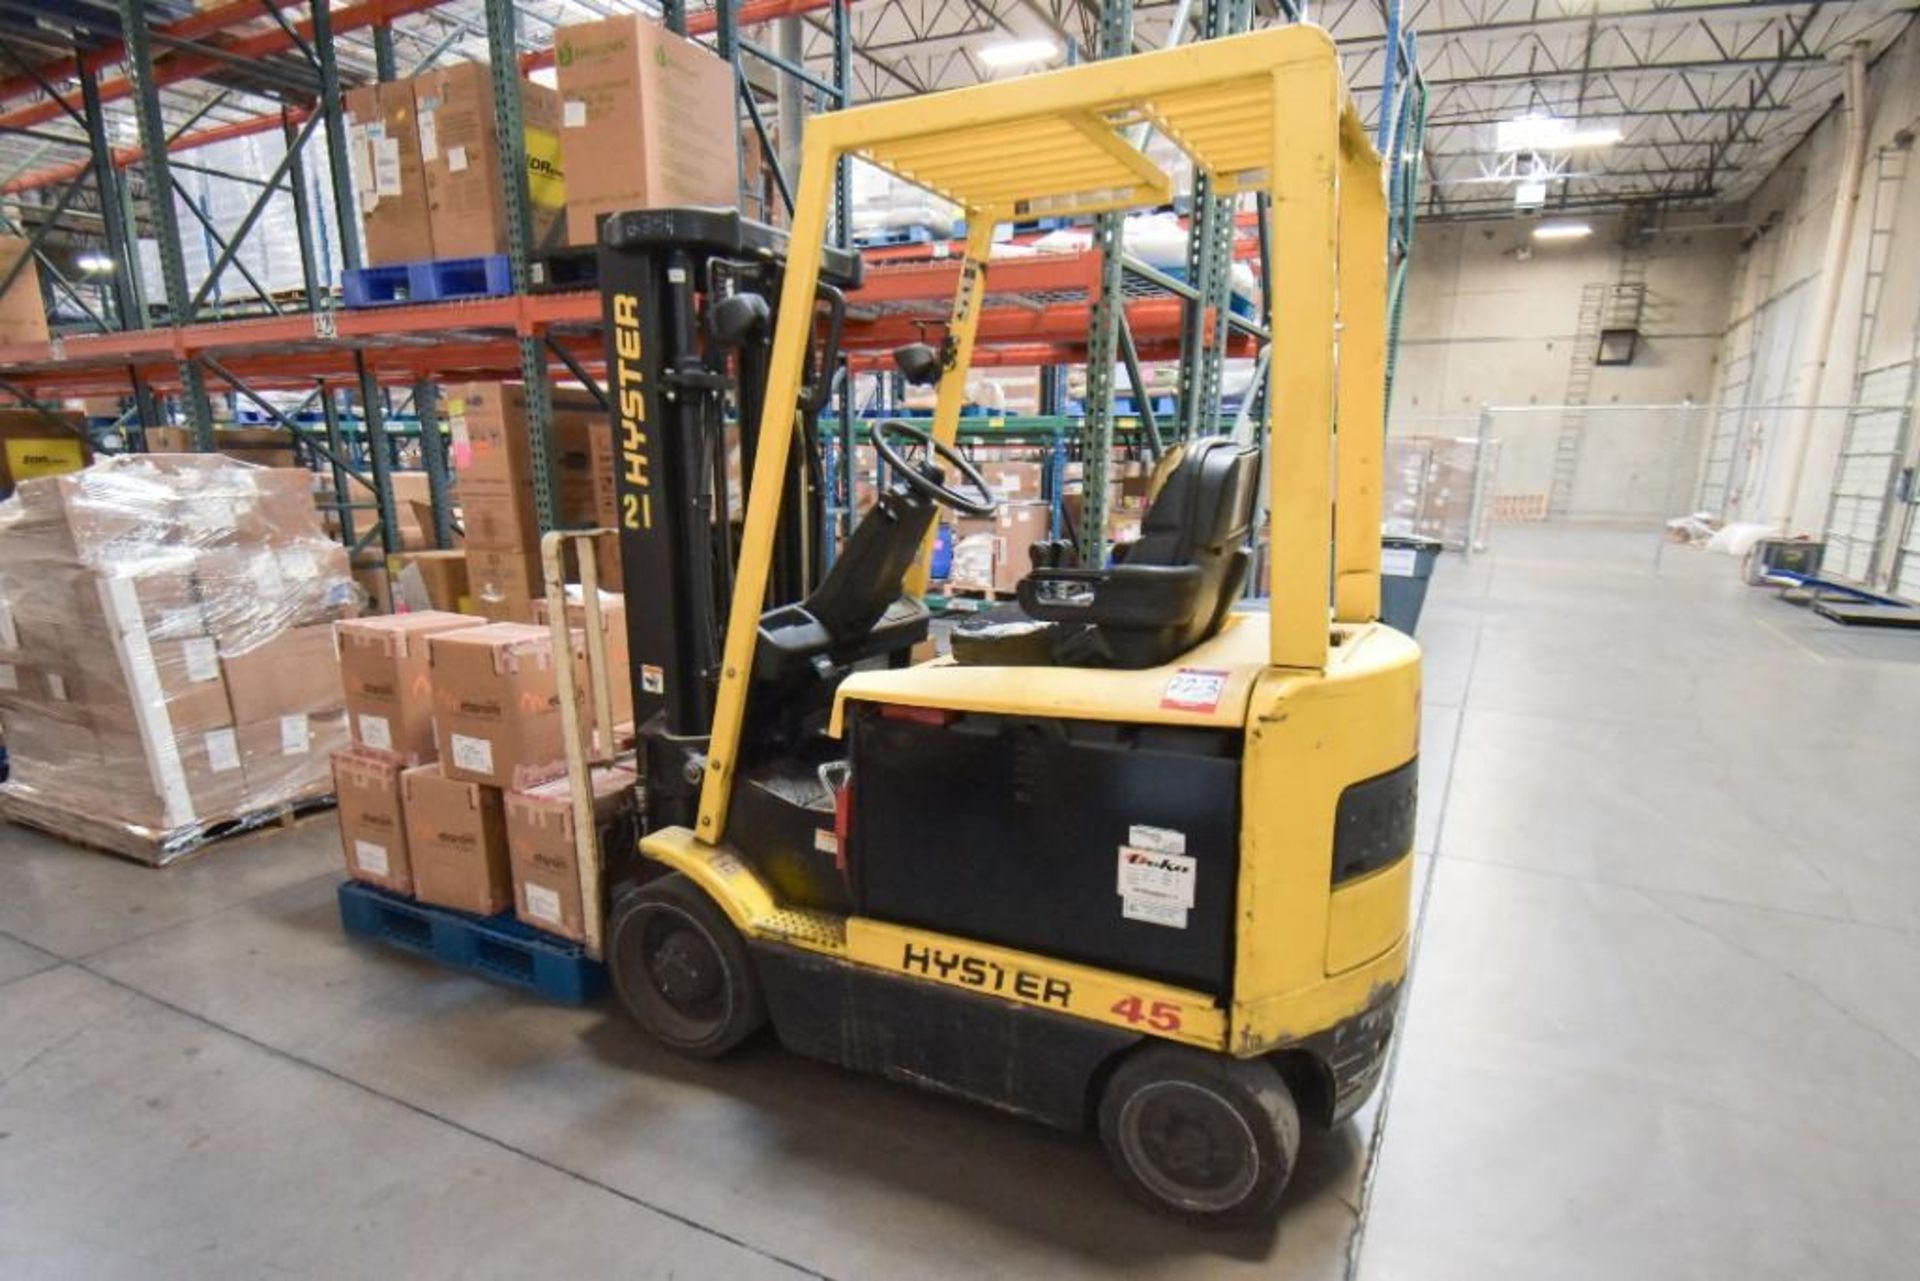 Hyster 45 Forklift w/ high frequency enforcer charger - Image 2 of 6